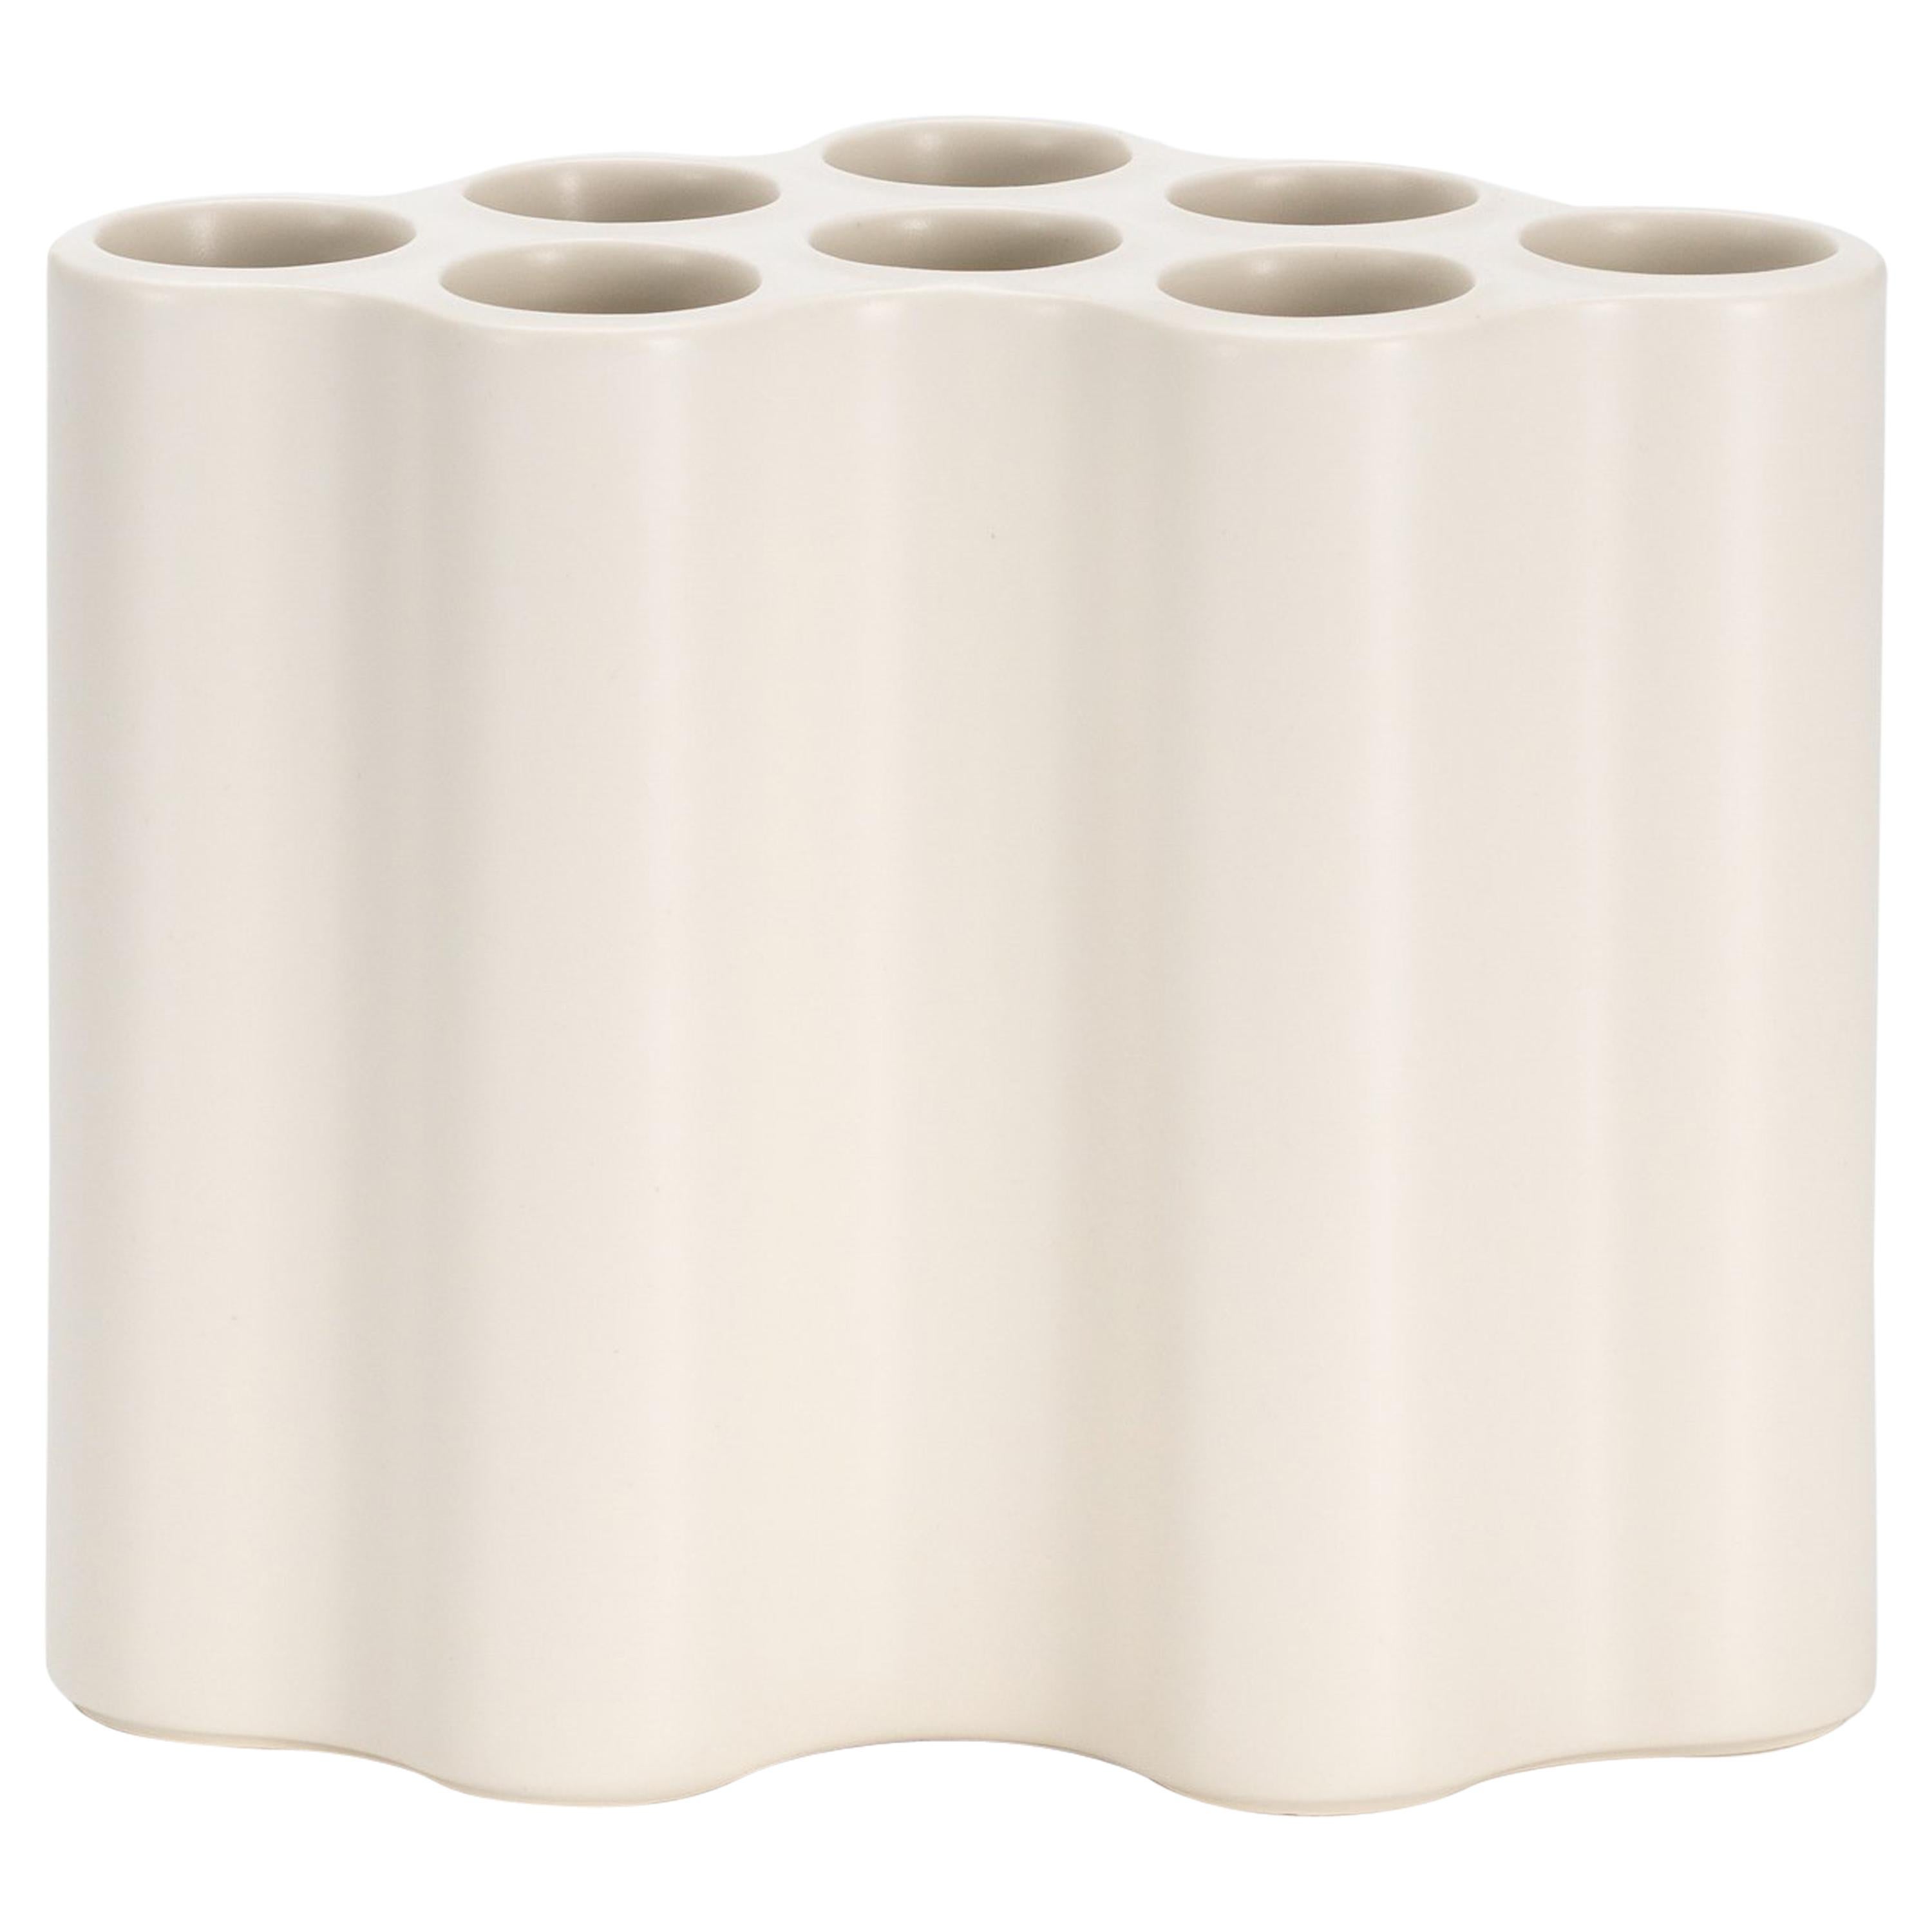 Vitra Medium Nuage Céramique Vase in White by Ronan & Erwan Bouroullec For Sale